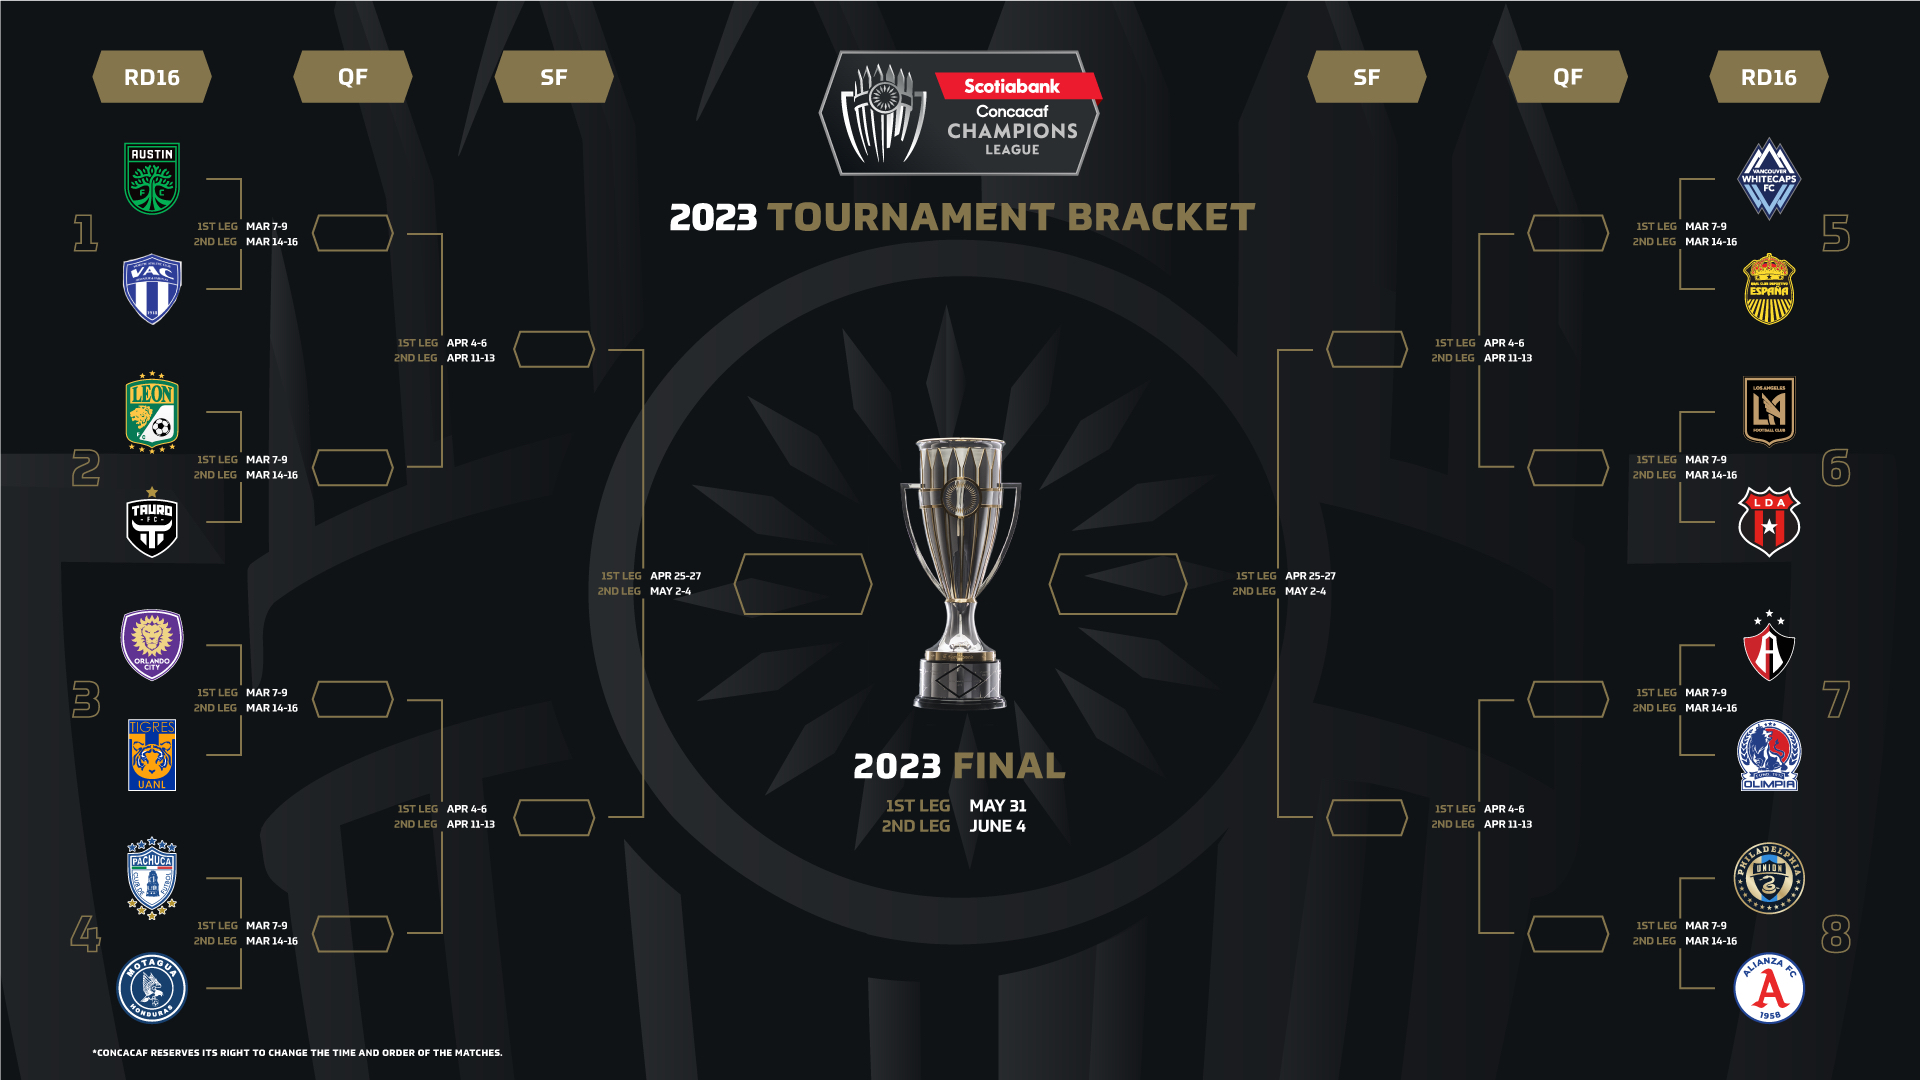 Schedule announced for 2023 Scotiabank Concacaf Champions League Round